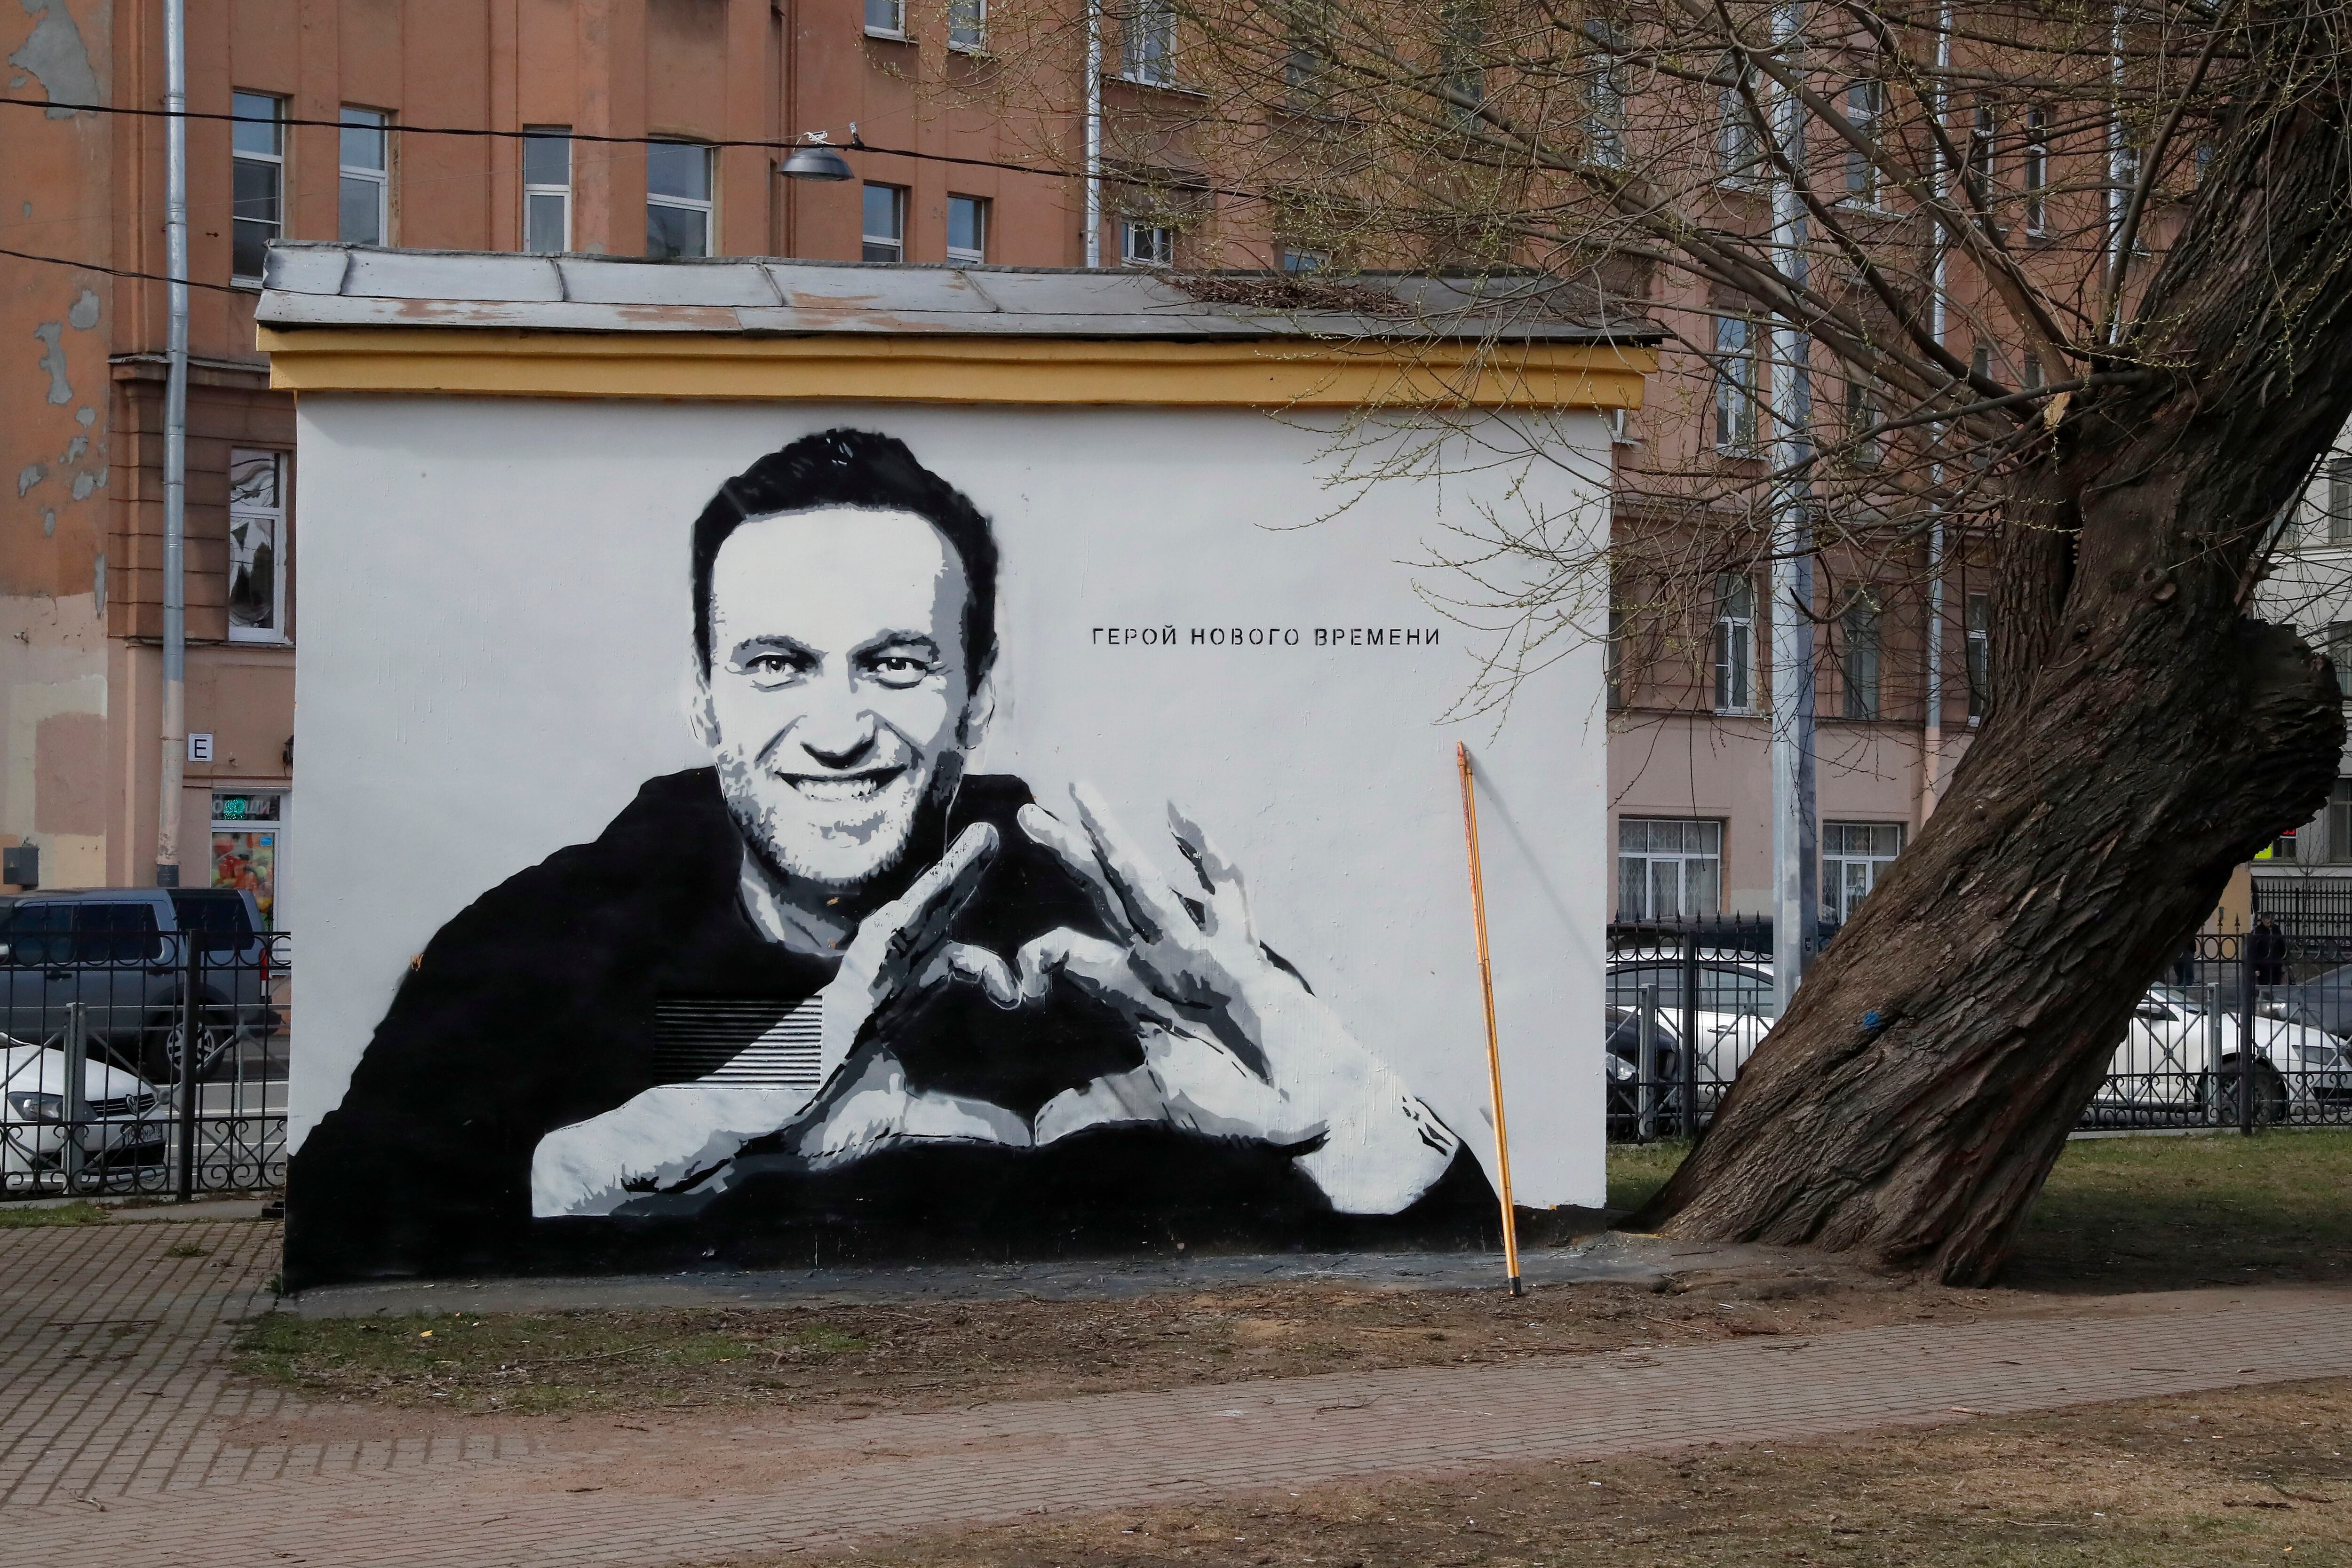 Archive image of a graffiti of the Russian opponent Alexei Navalny in a street of Saint Petersburg (EFE)